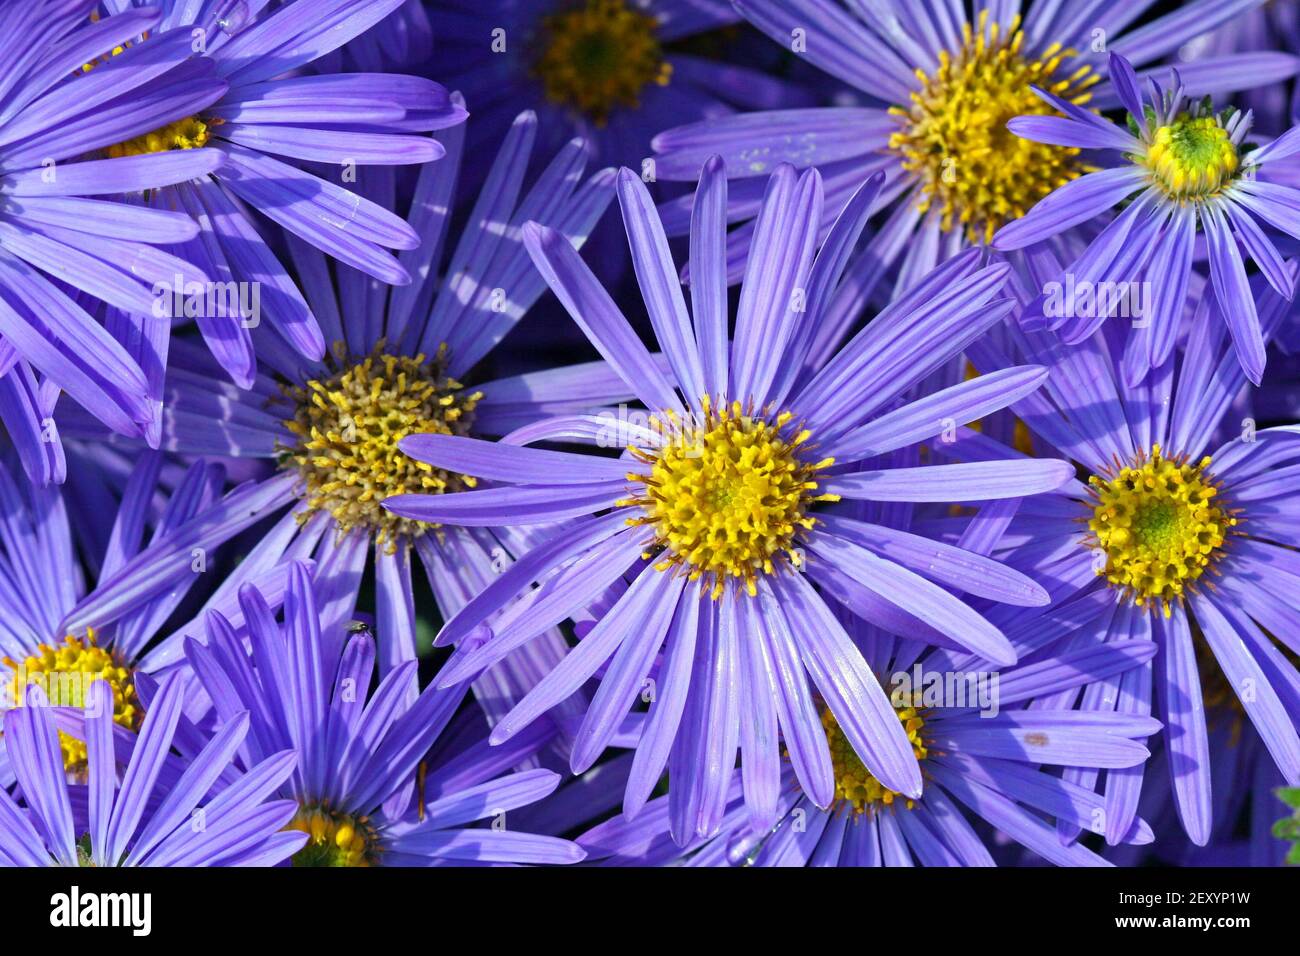 Full-frame shot of Aster heads: slender lavender-blue ray-florets surround a golden yellow centre. Stock Photo